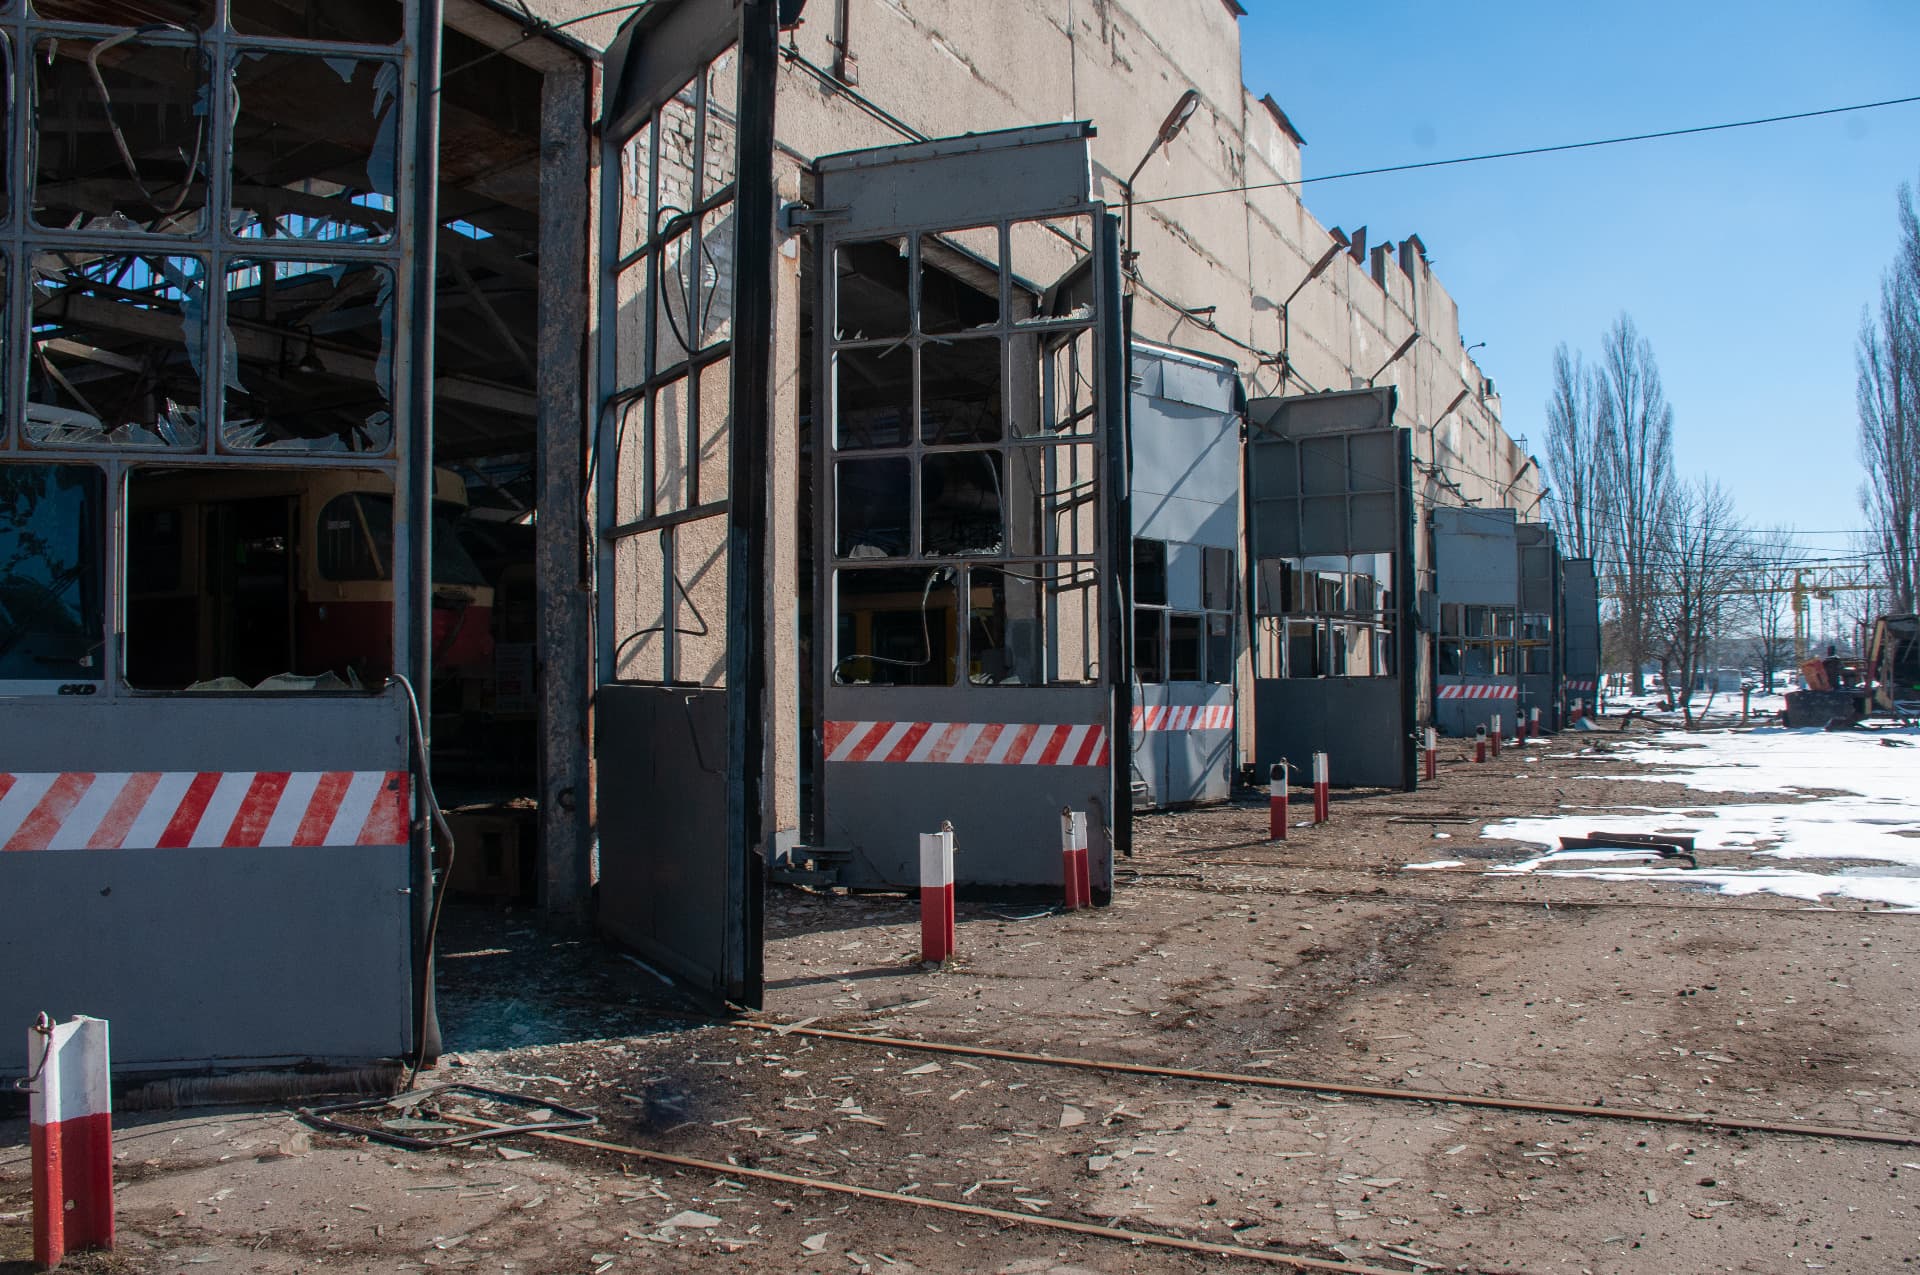 Destroyed as a result of explosions and shelling by the Russian military invaders KP Saltovskoe tram depot in Kharkiv